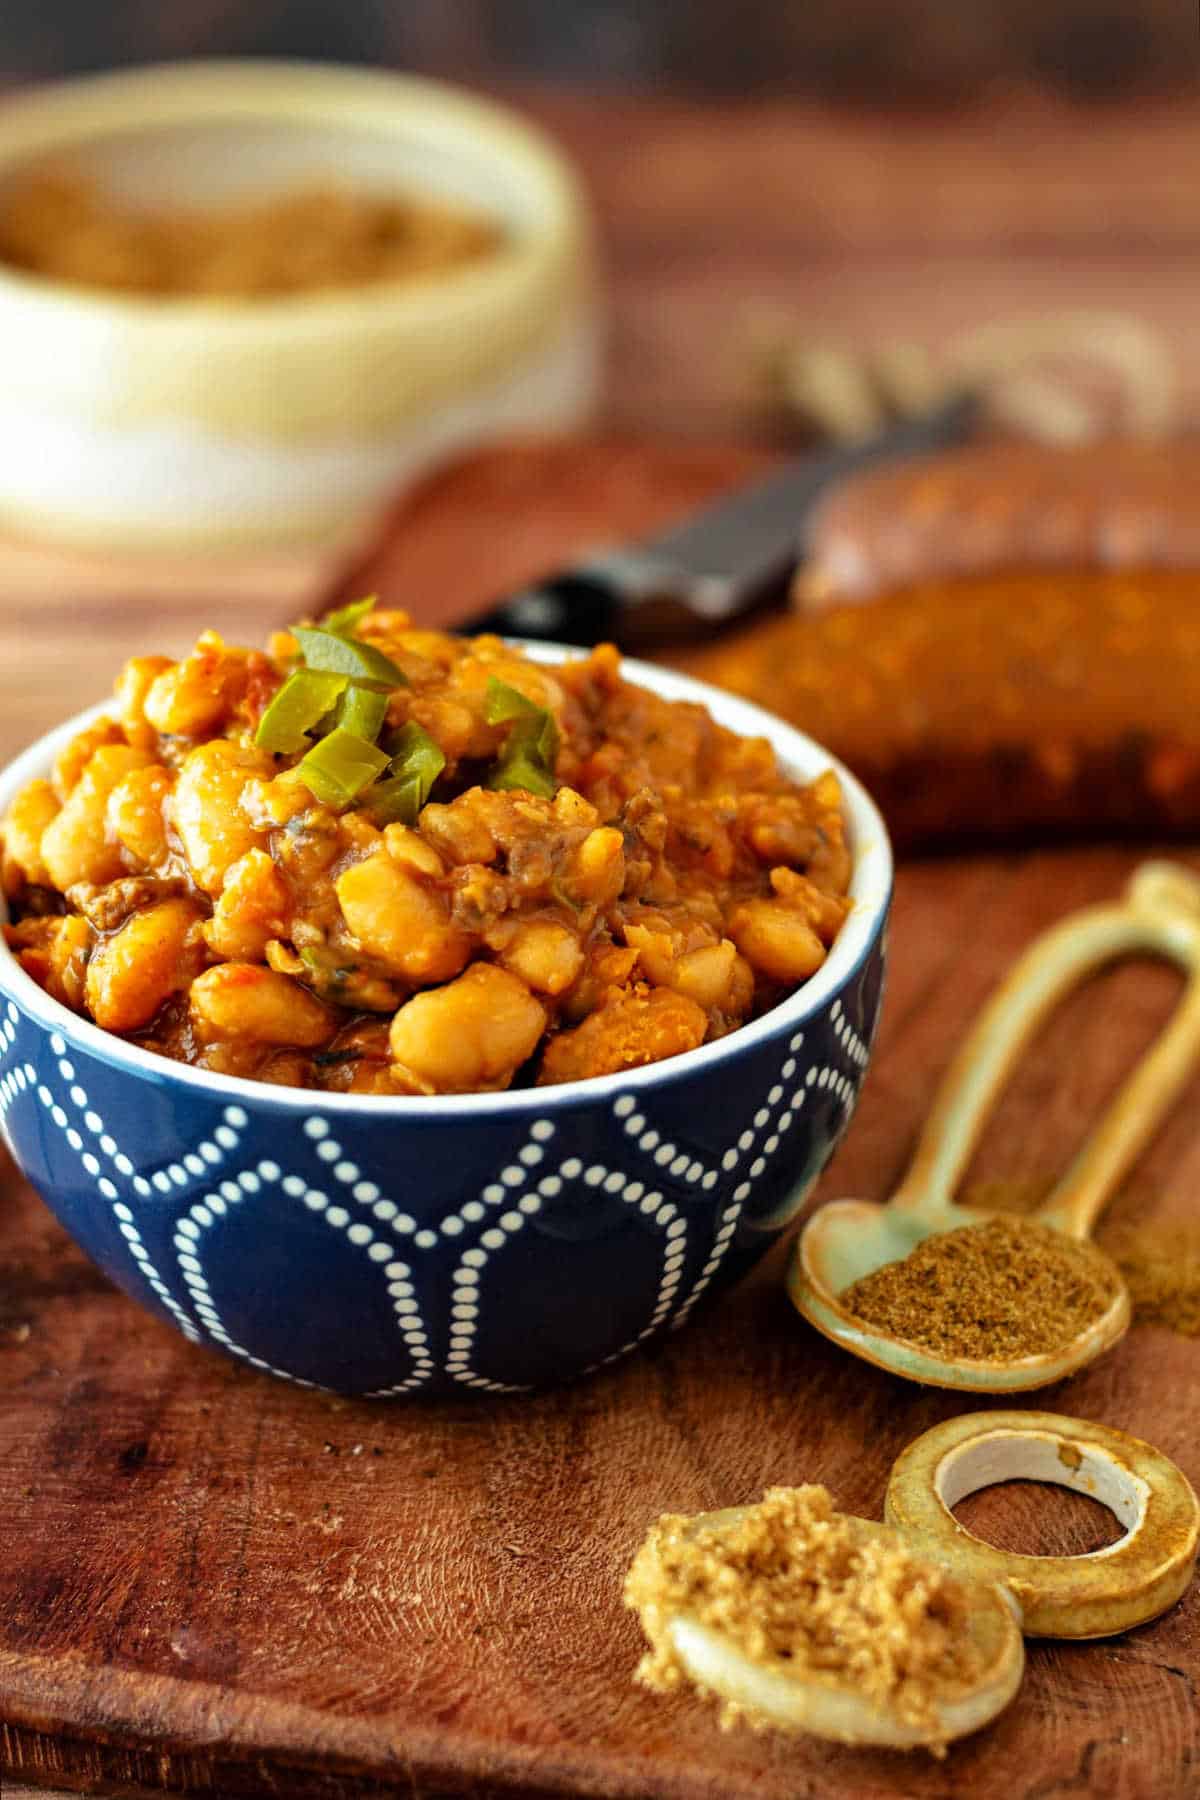 A small blue bowl of baked beans with spoonfuls of brown sugar and cumin next to it with some uncooked chorizo in the background.